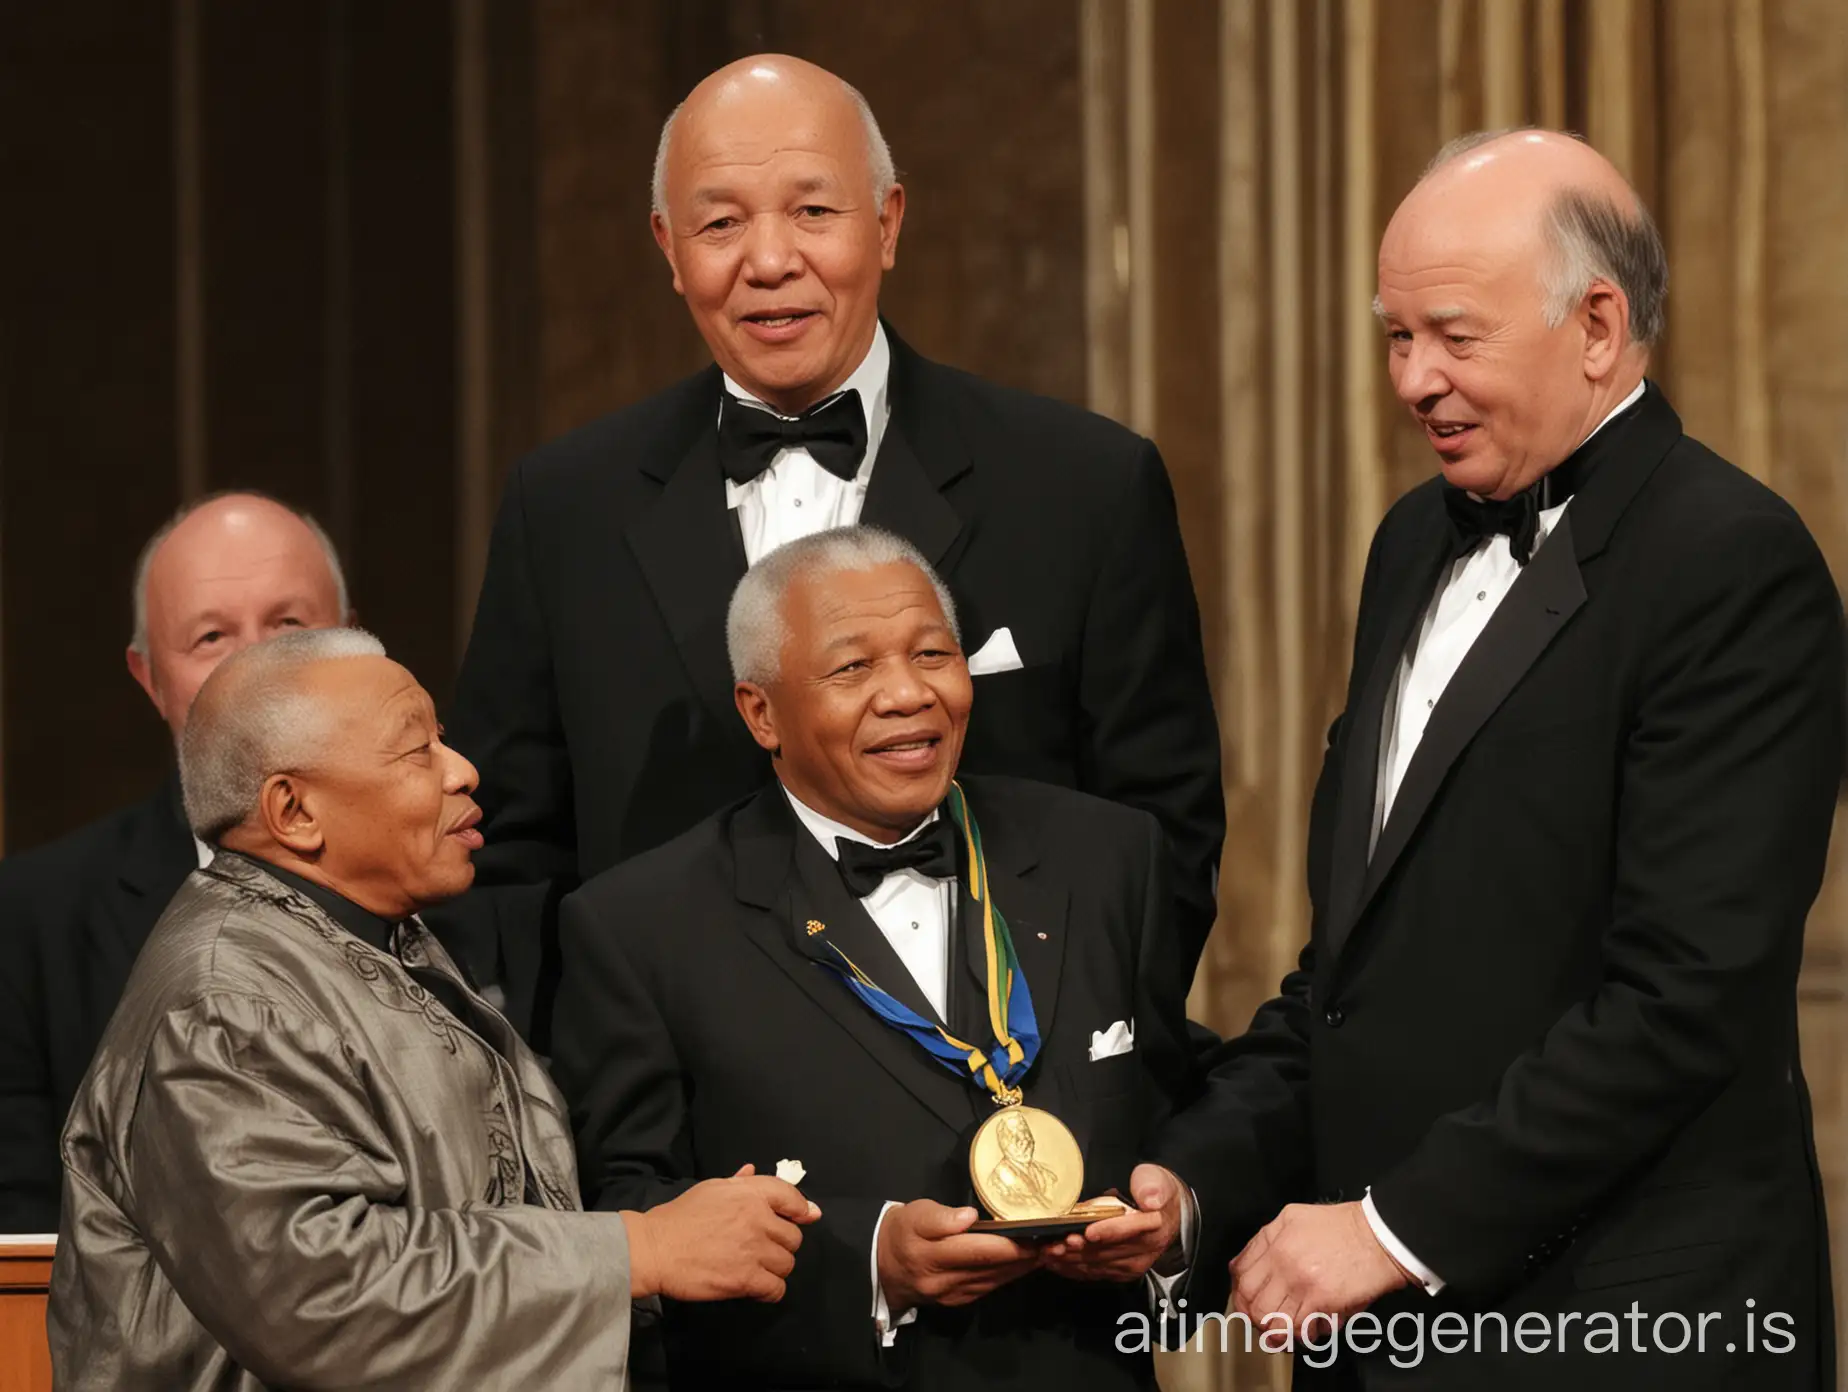 Mandela and de Klerk receiving the Nobel Peace Prize, with the Nobel medal prominently displayed.